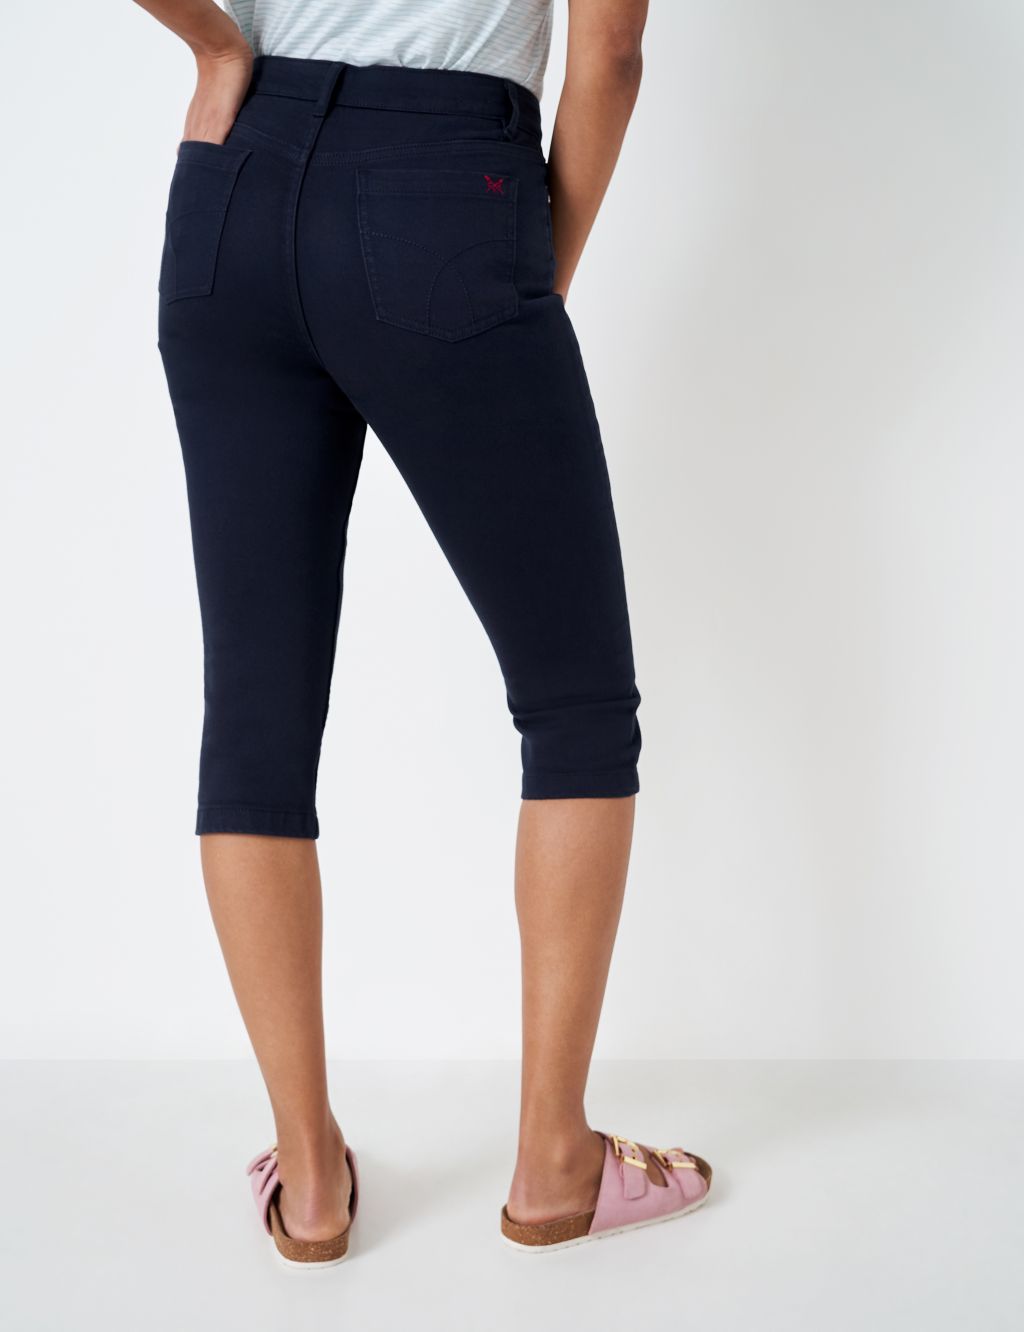 Skinny Cropped Jeans image 4